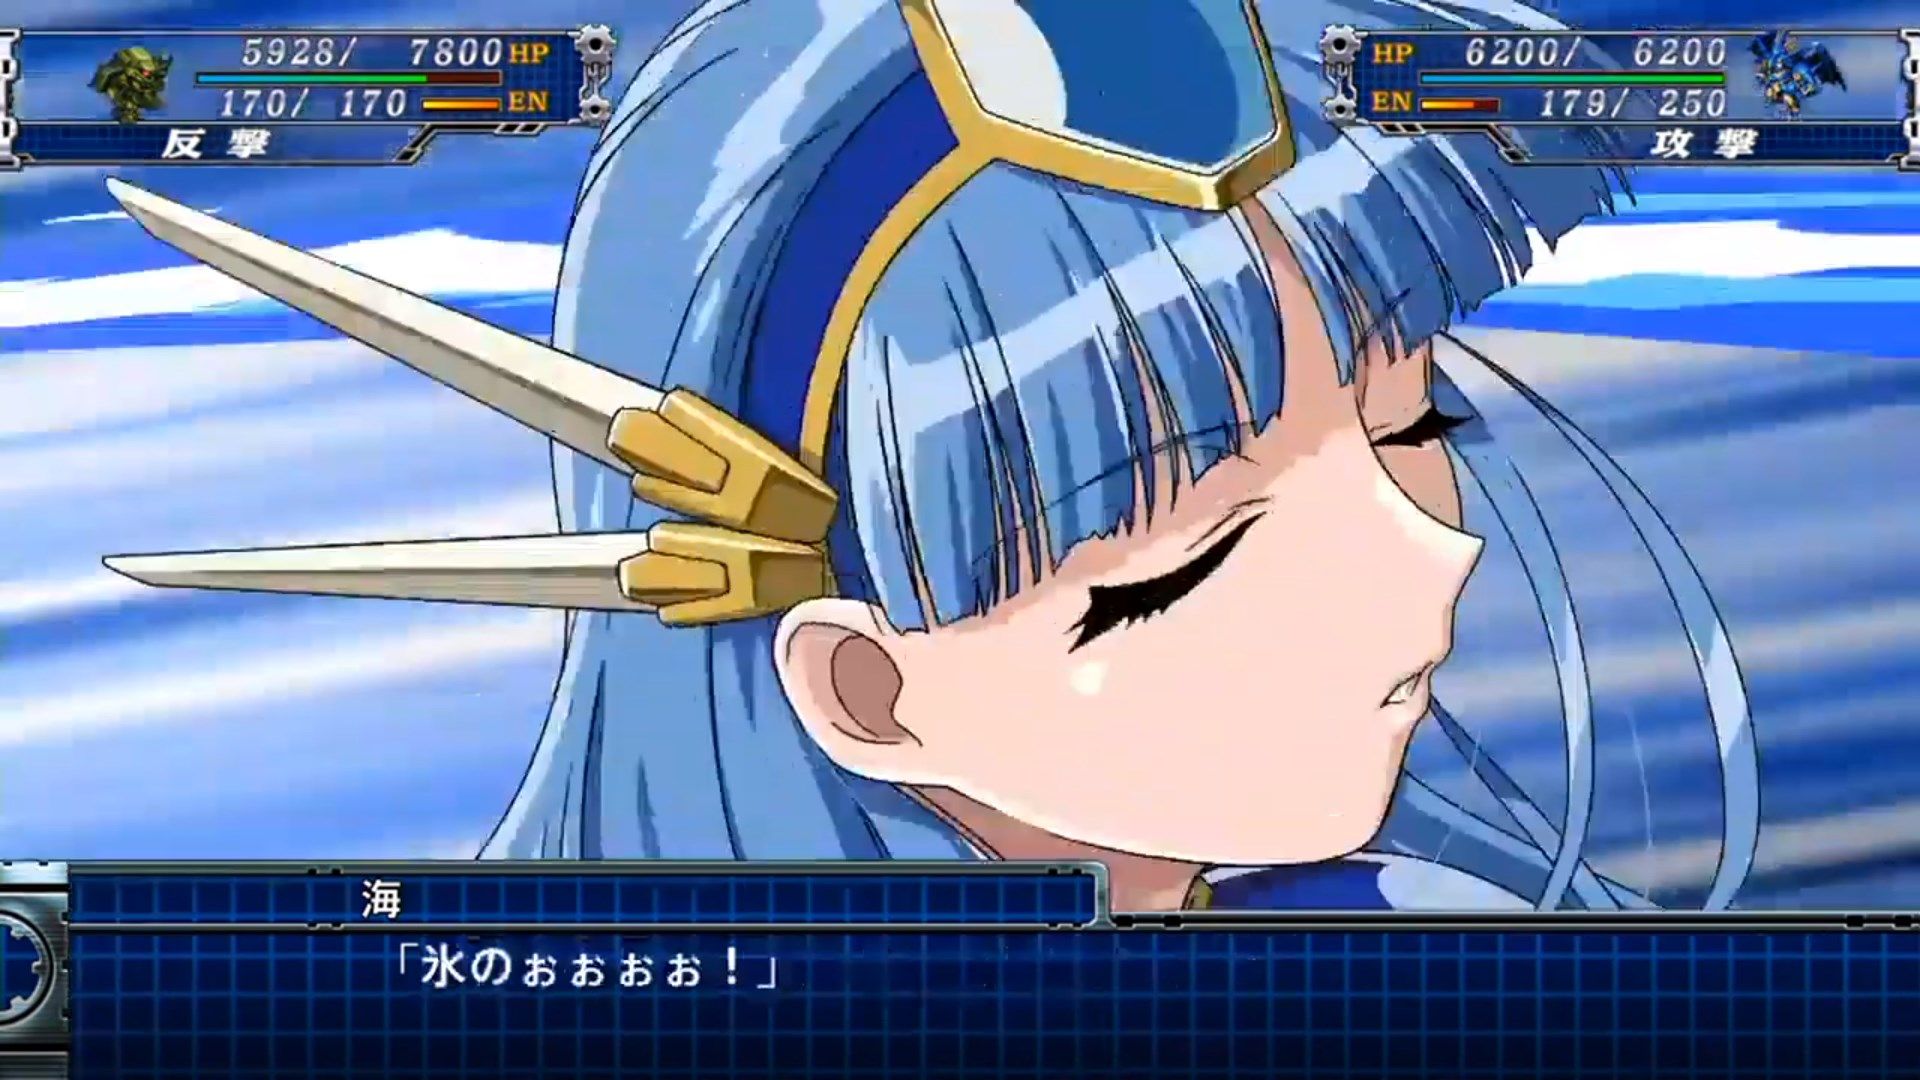 Super Robot Wars T Latest Gameplay, Comments from Hidetaka Tenjin and Cast